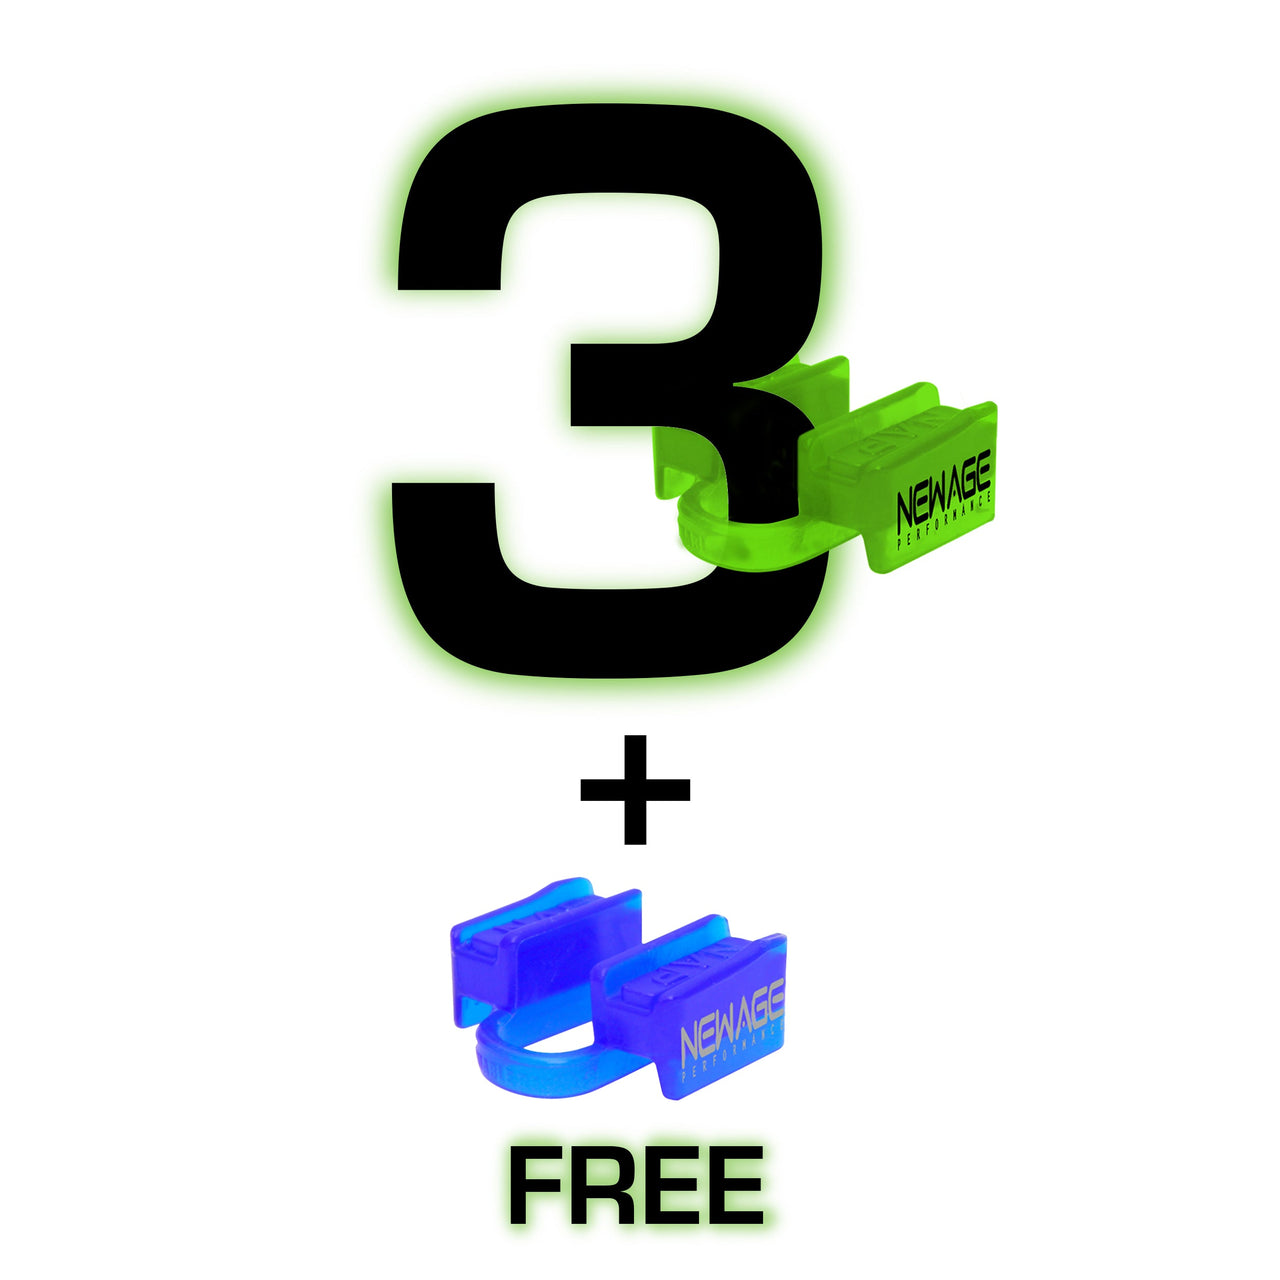 "Promotion: Buy 3, Get 1 Free - Big 3 with + 1 offer on mouthpieces